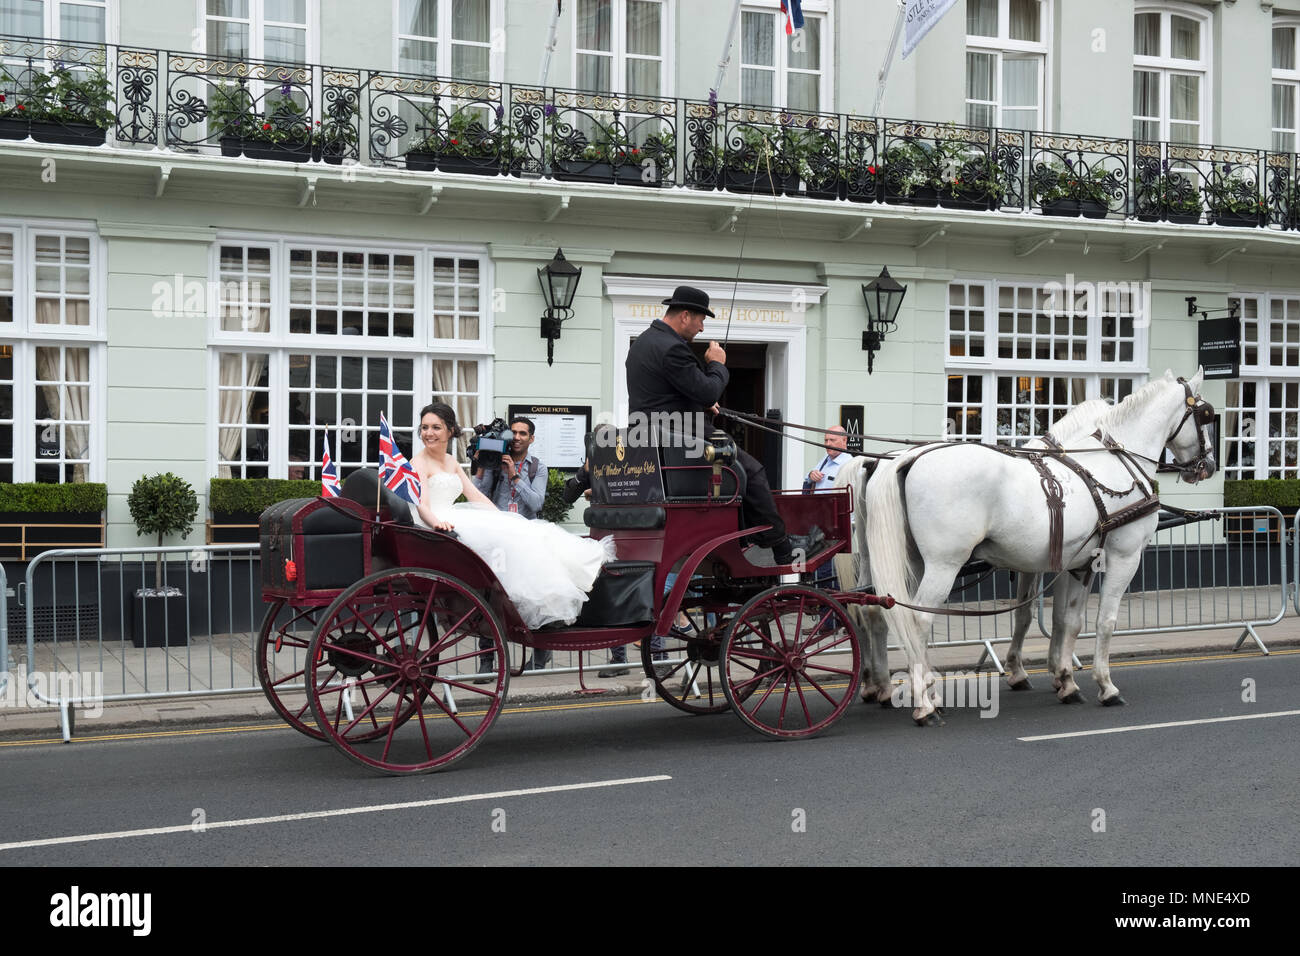 Royal Wedding preparations in Windsor town centre. A model bride is filmed riding in a carriage in the town. Stock Photo